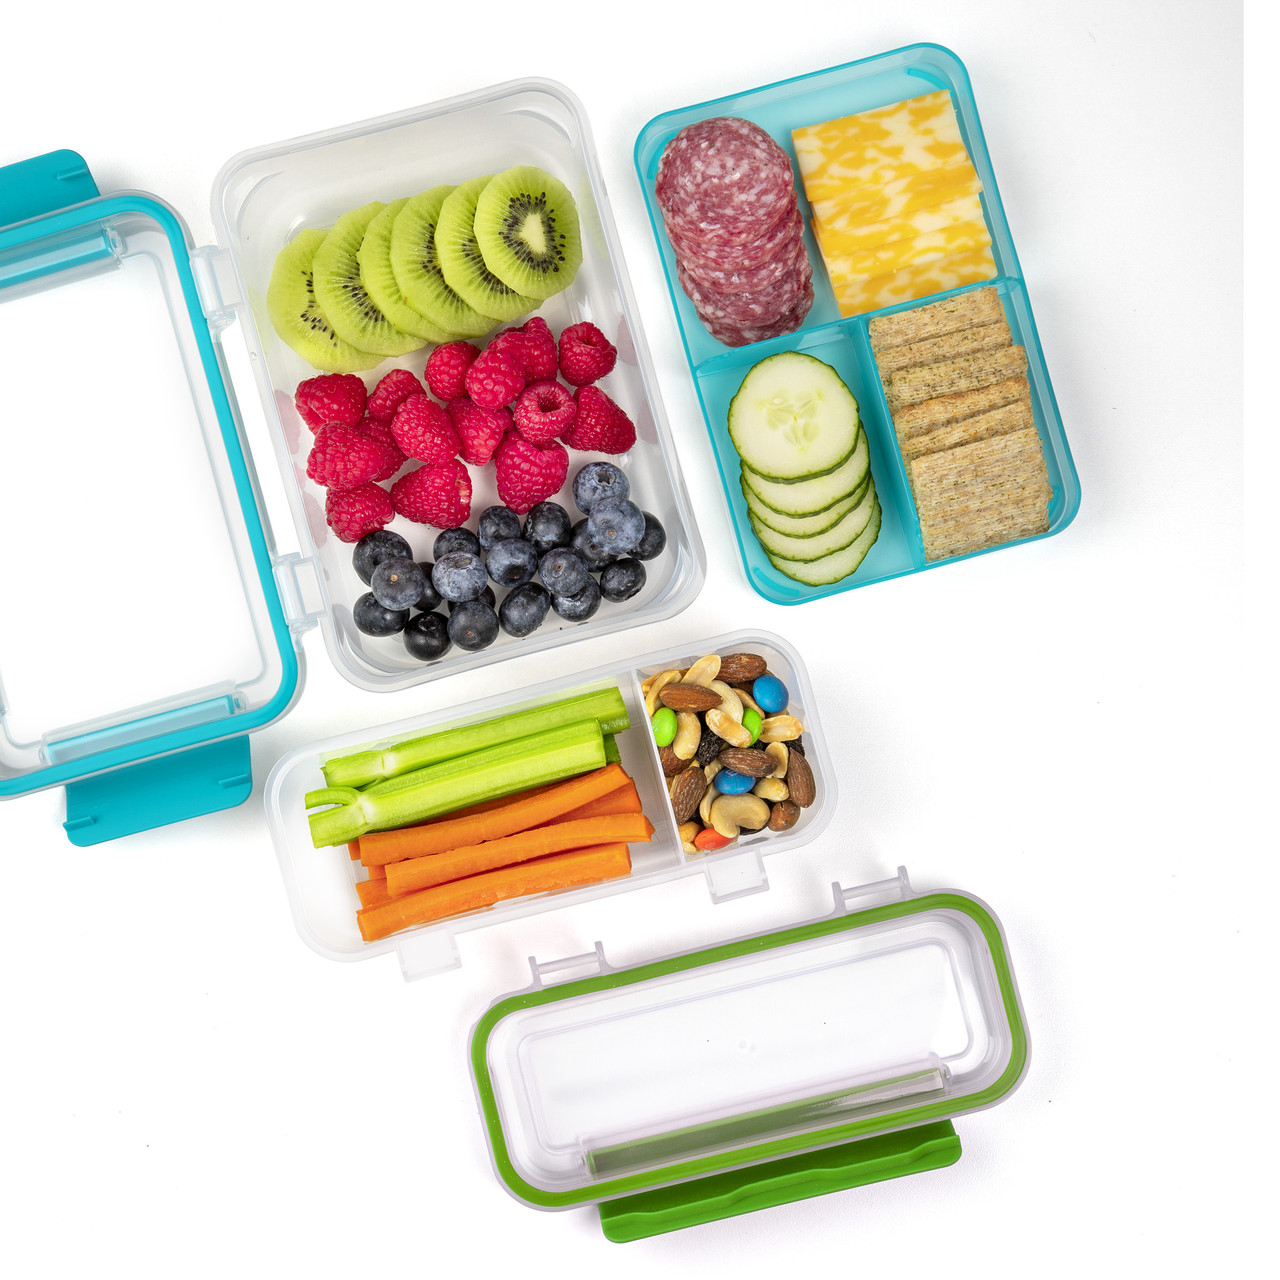 Stackable Bento Lunch Set with Phone Stand - Progress Promotional Products